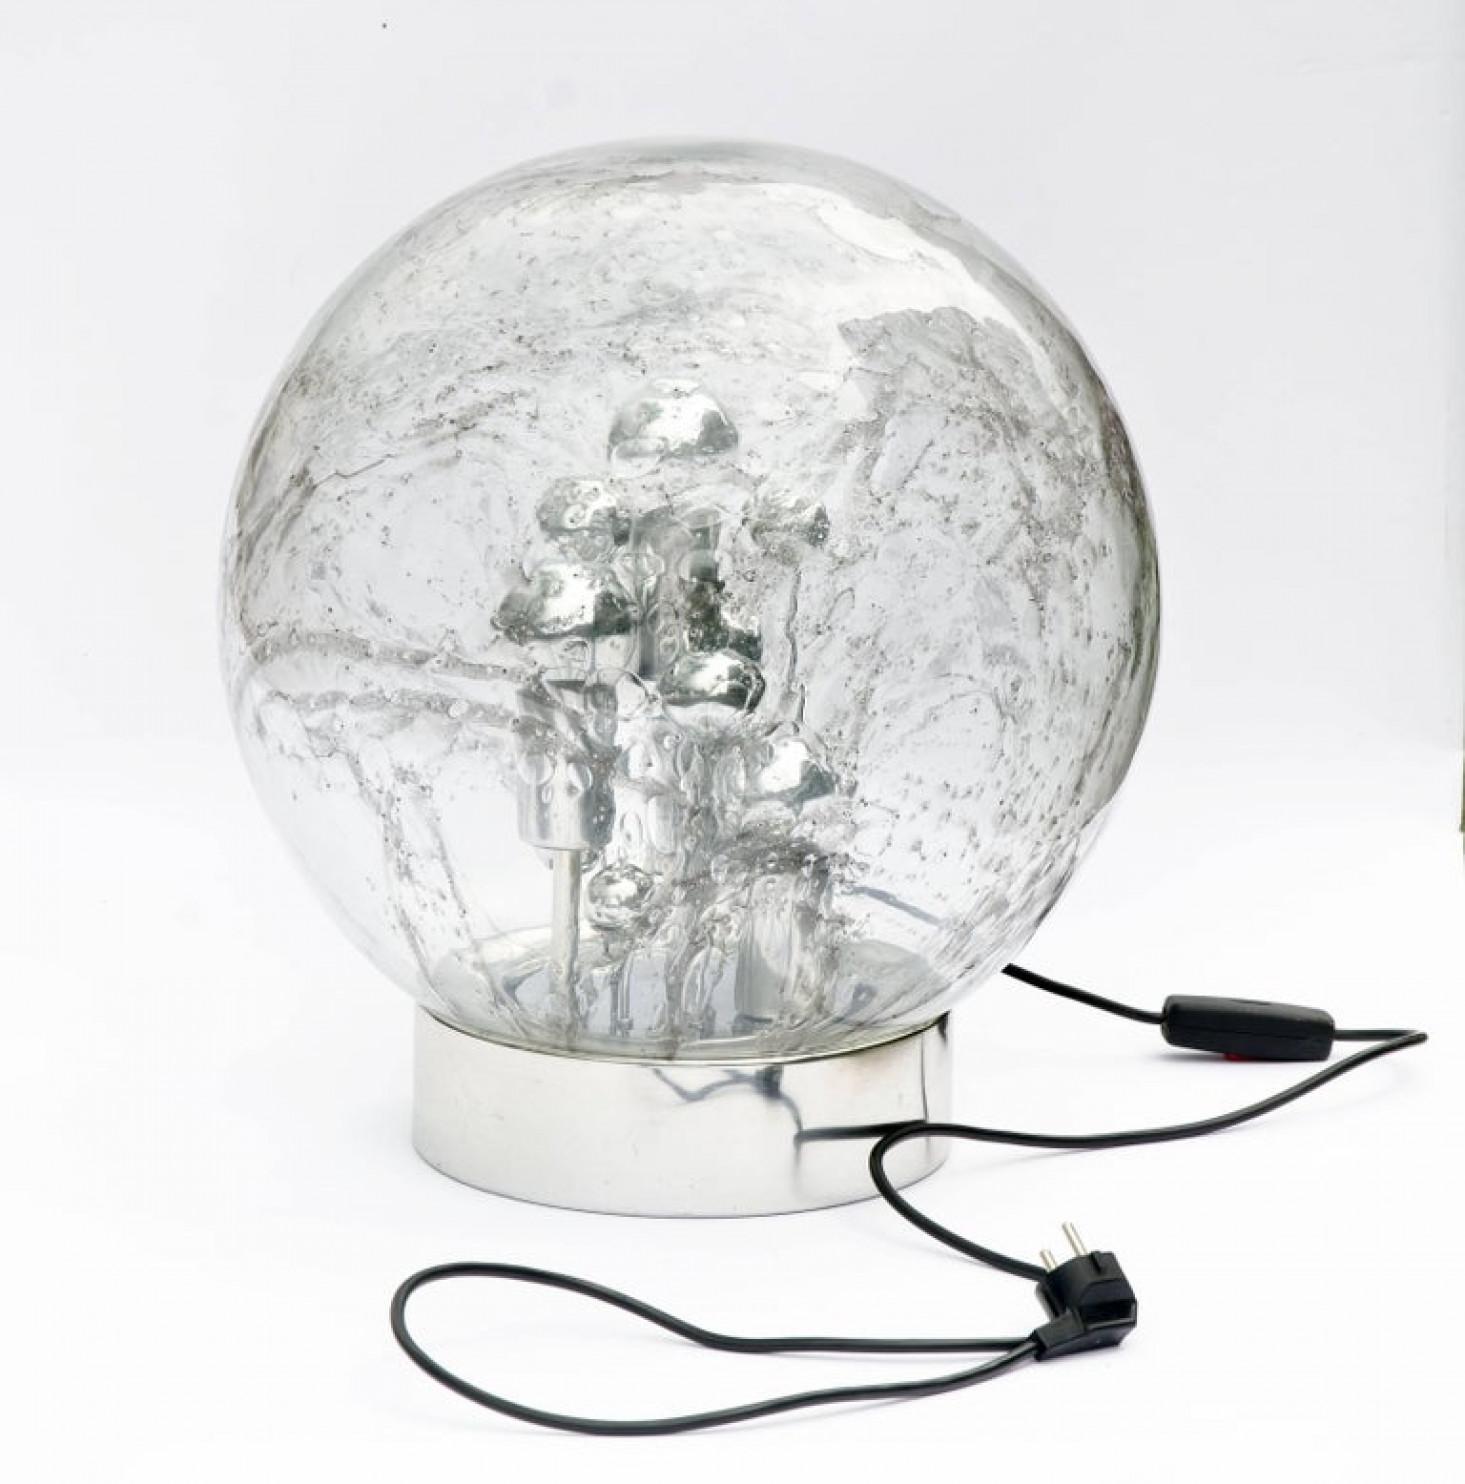 Enormous Doria hand blown glass sphere on chrome base lamp, Italy, circa 1970. This exceptional artefact of modern design from Italy reflects the extreme interest in modernism across Europe during this period. The sphere was purposely created to be